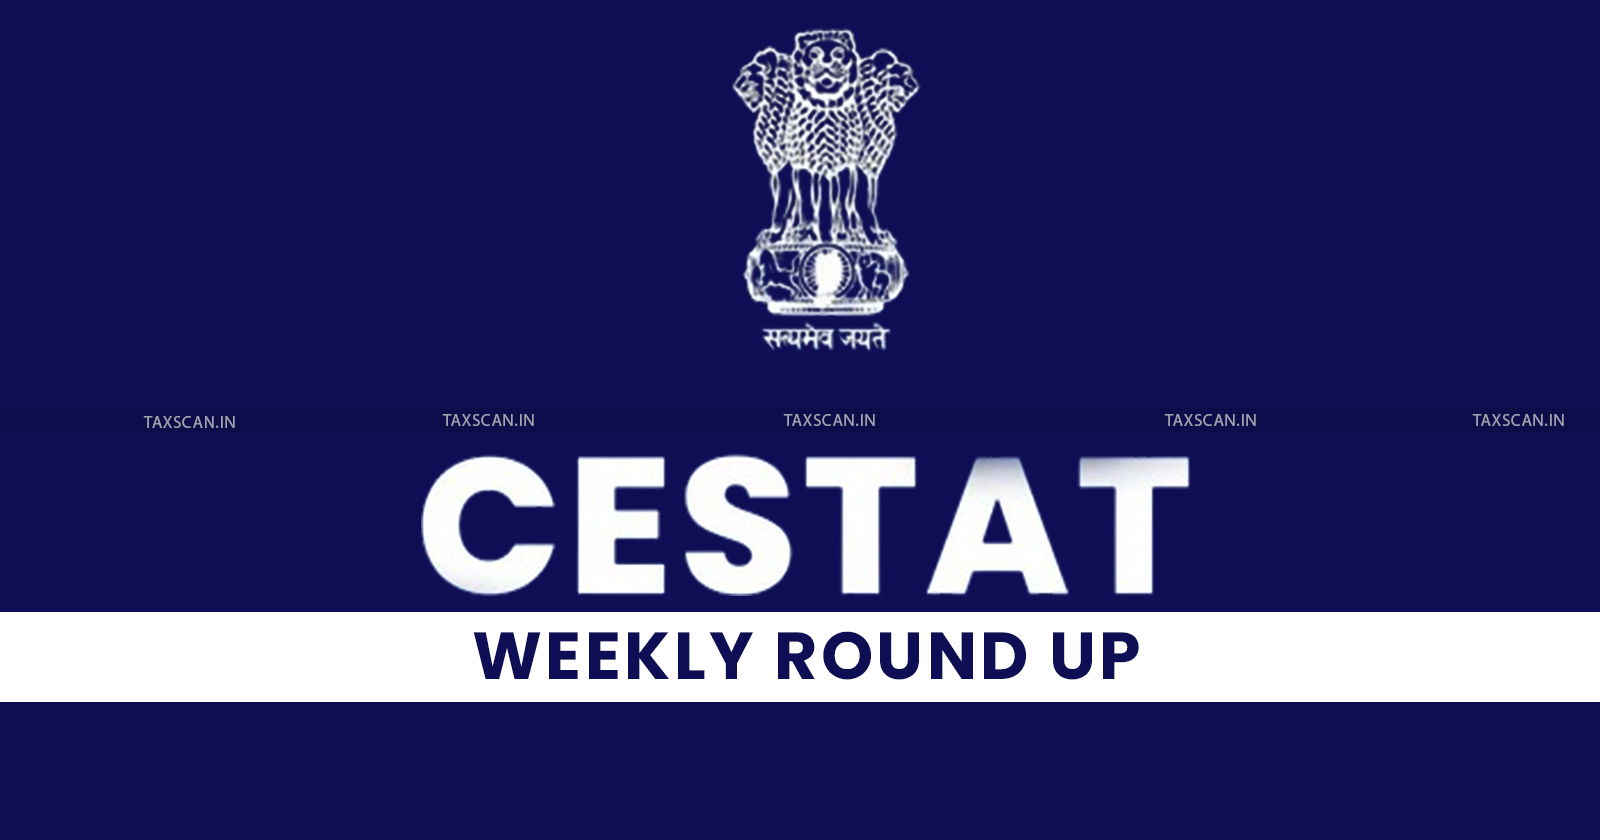 CESTAT Weekly Round Up - CESTAT - Customs Excise and Service Tax Appellate Tribunal - CESTAT Update - CESTAT News - Tax News - Taxscan